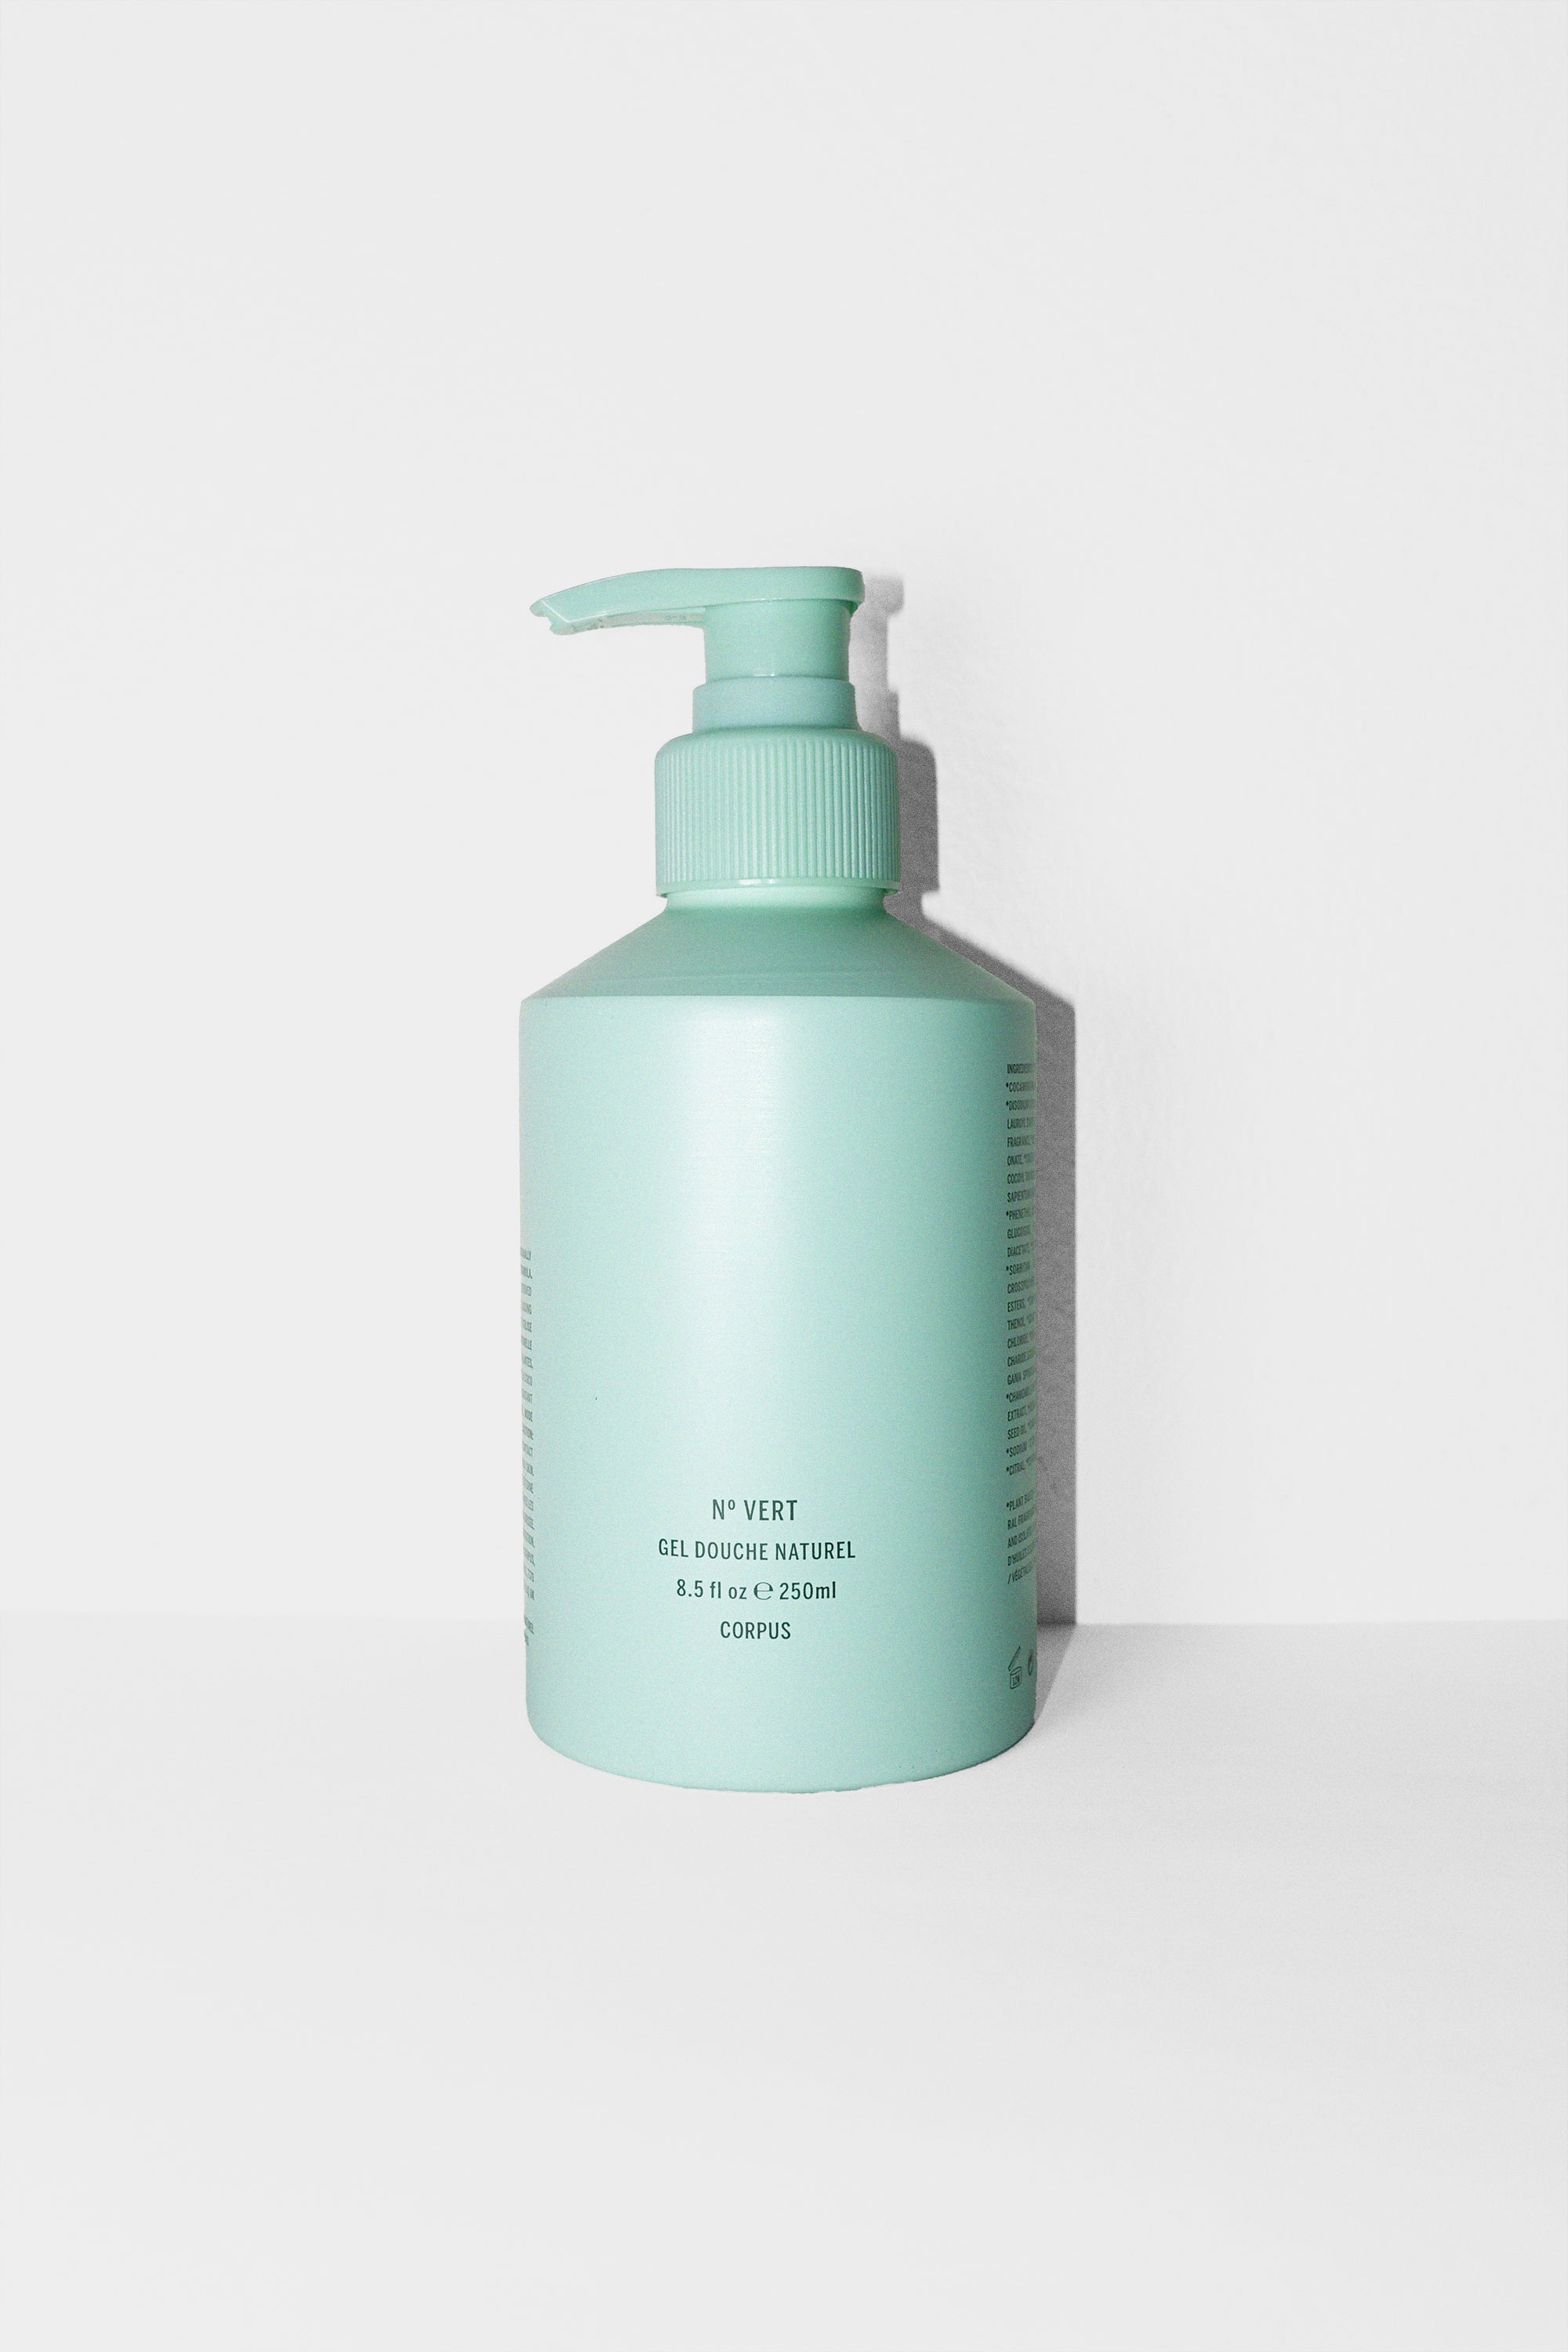 No. Green Body Wash by Corpus